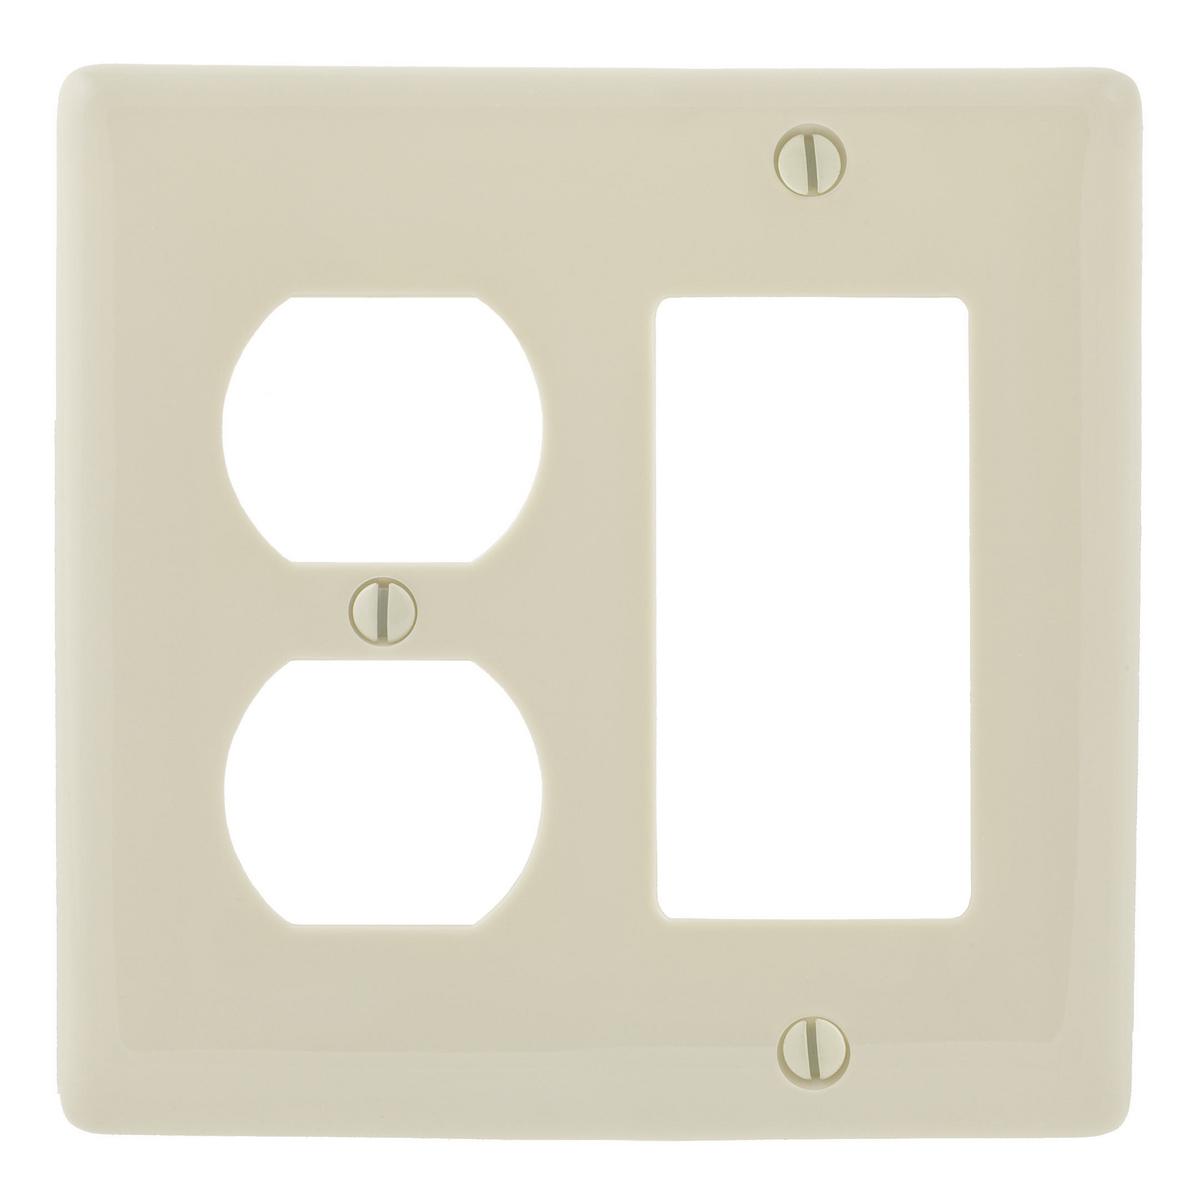 Hubbell NP826LA Wallplates and Box Covers, Wallplate, Nylon, 2-Gang, 1) Duplex 1) Decorator, Light Almond  ; Reinforcement ribs for extra strength ; High-impact, self-extinguishing nylon material ; Captive screw feature holds mounting screw in place ; Standard Size is 1/